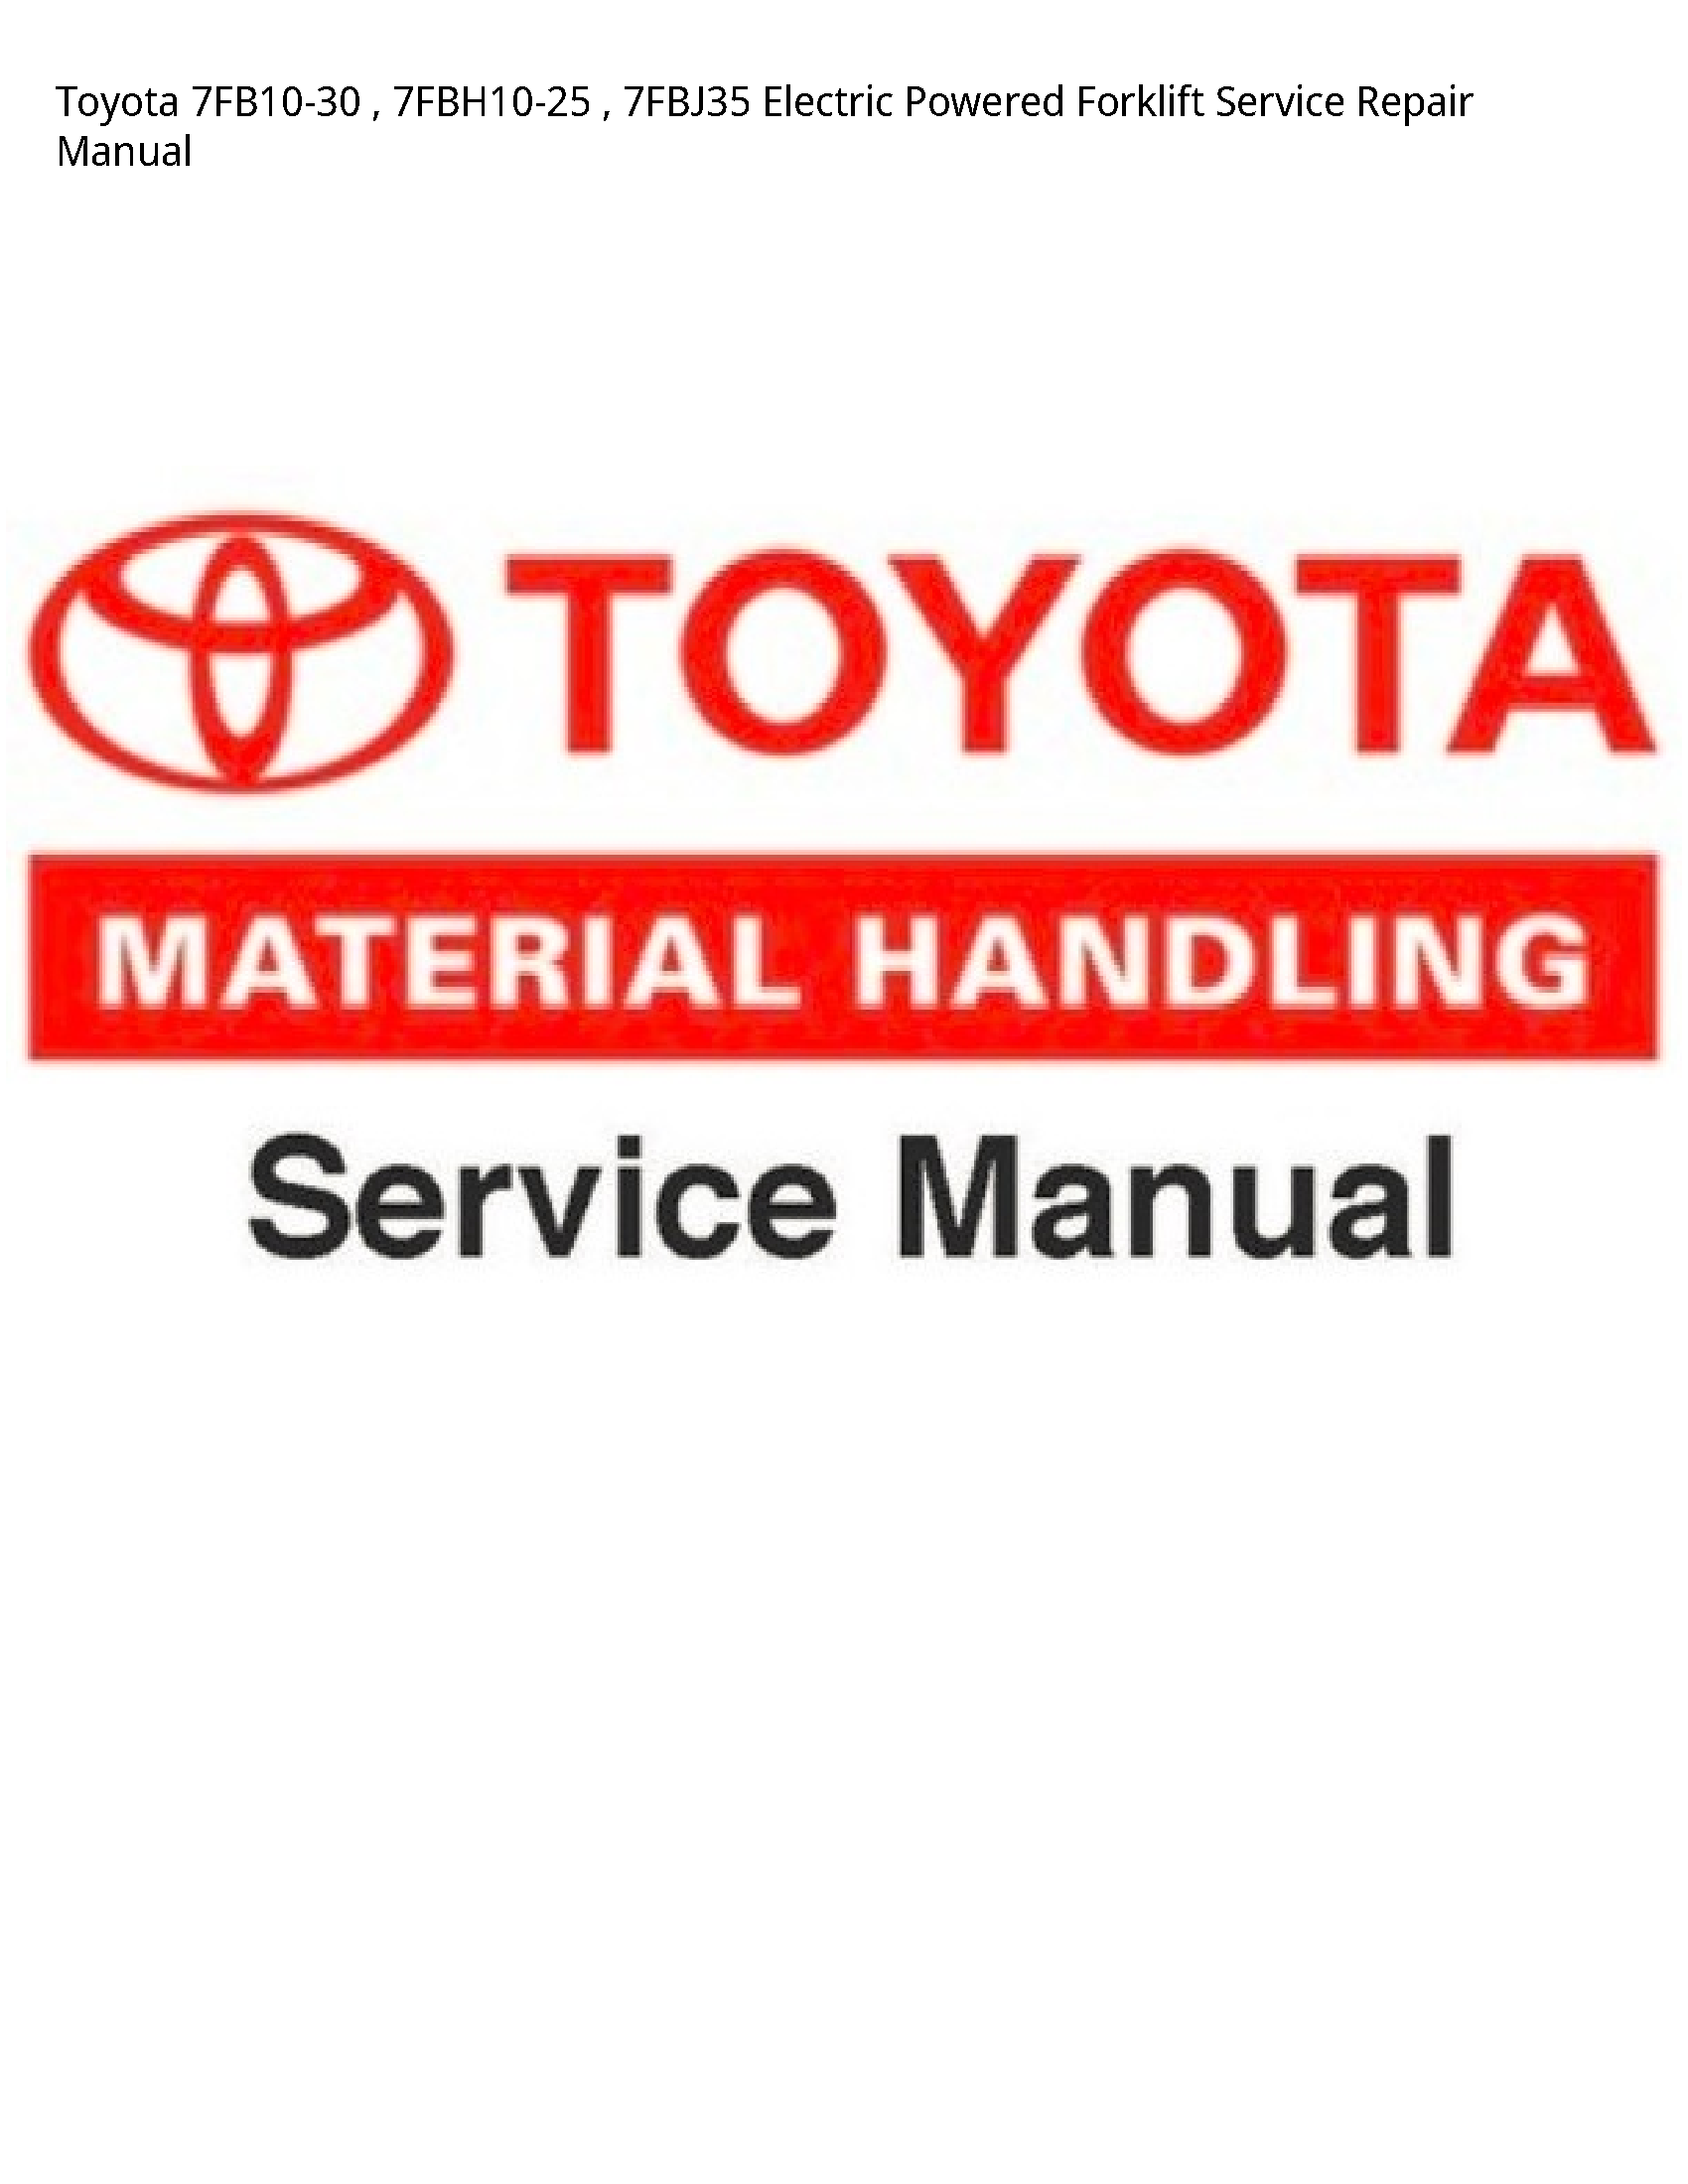 Toyota 7FB10-30 Electric Powered Forklift manual